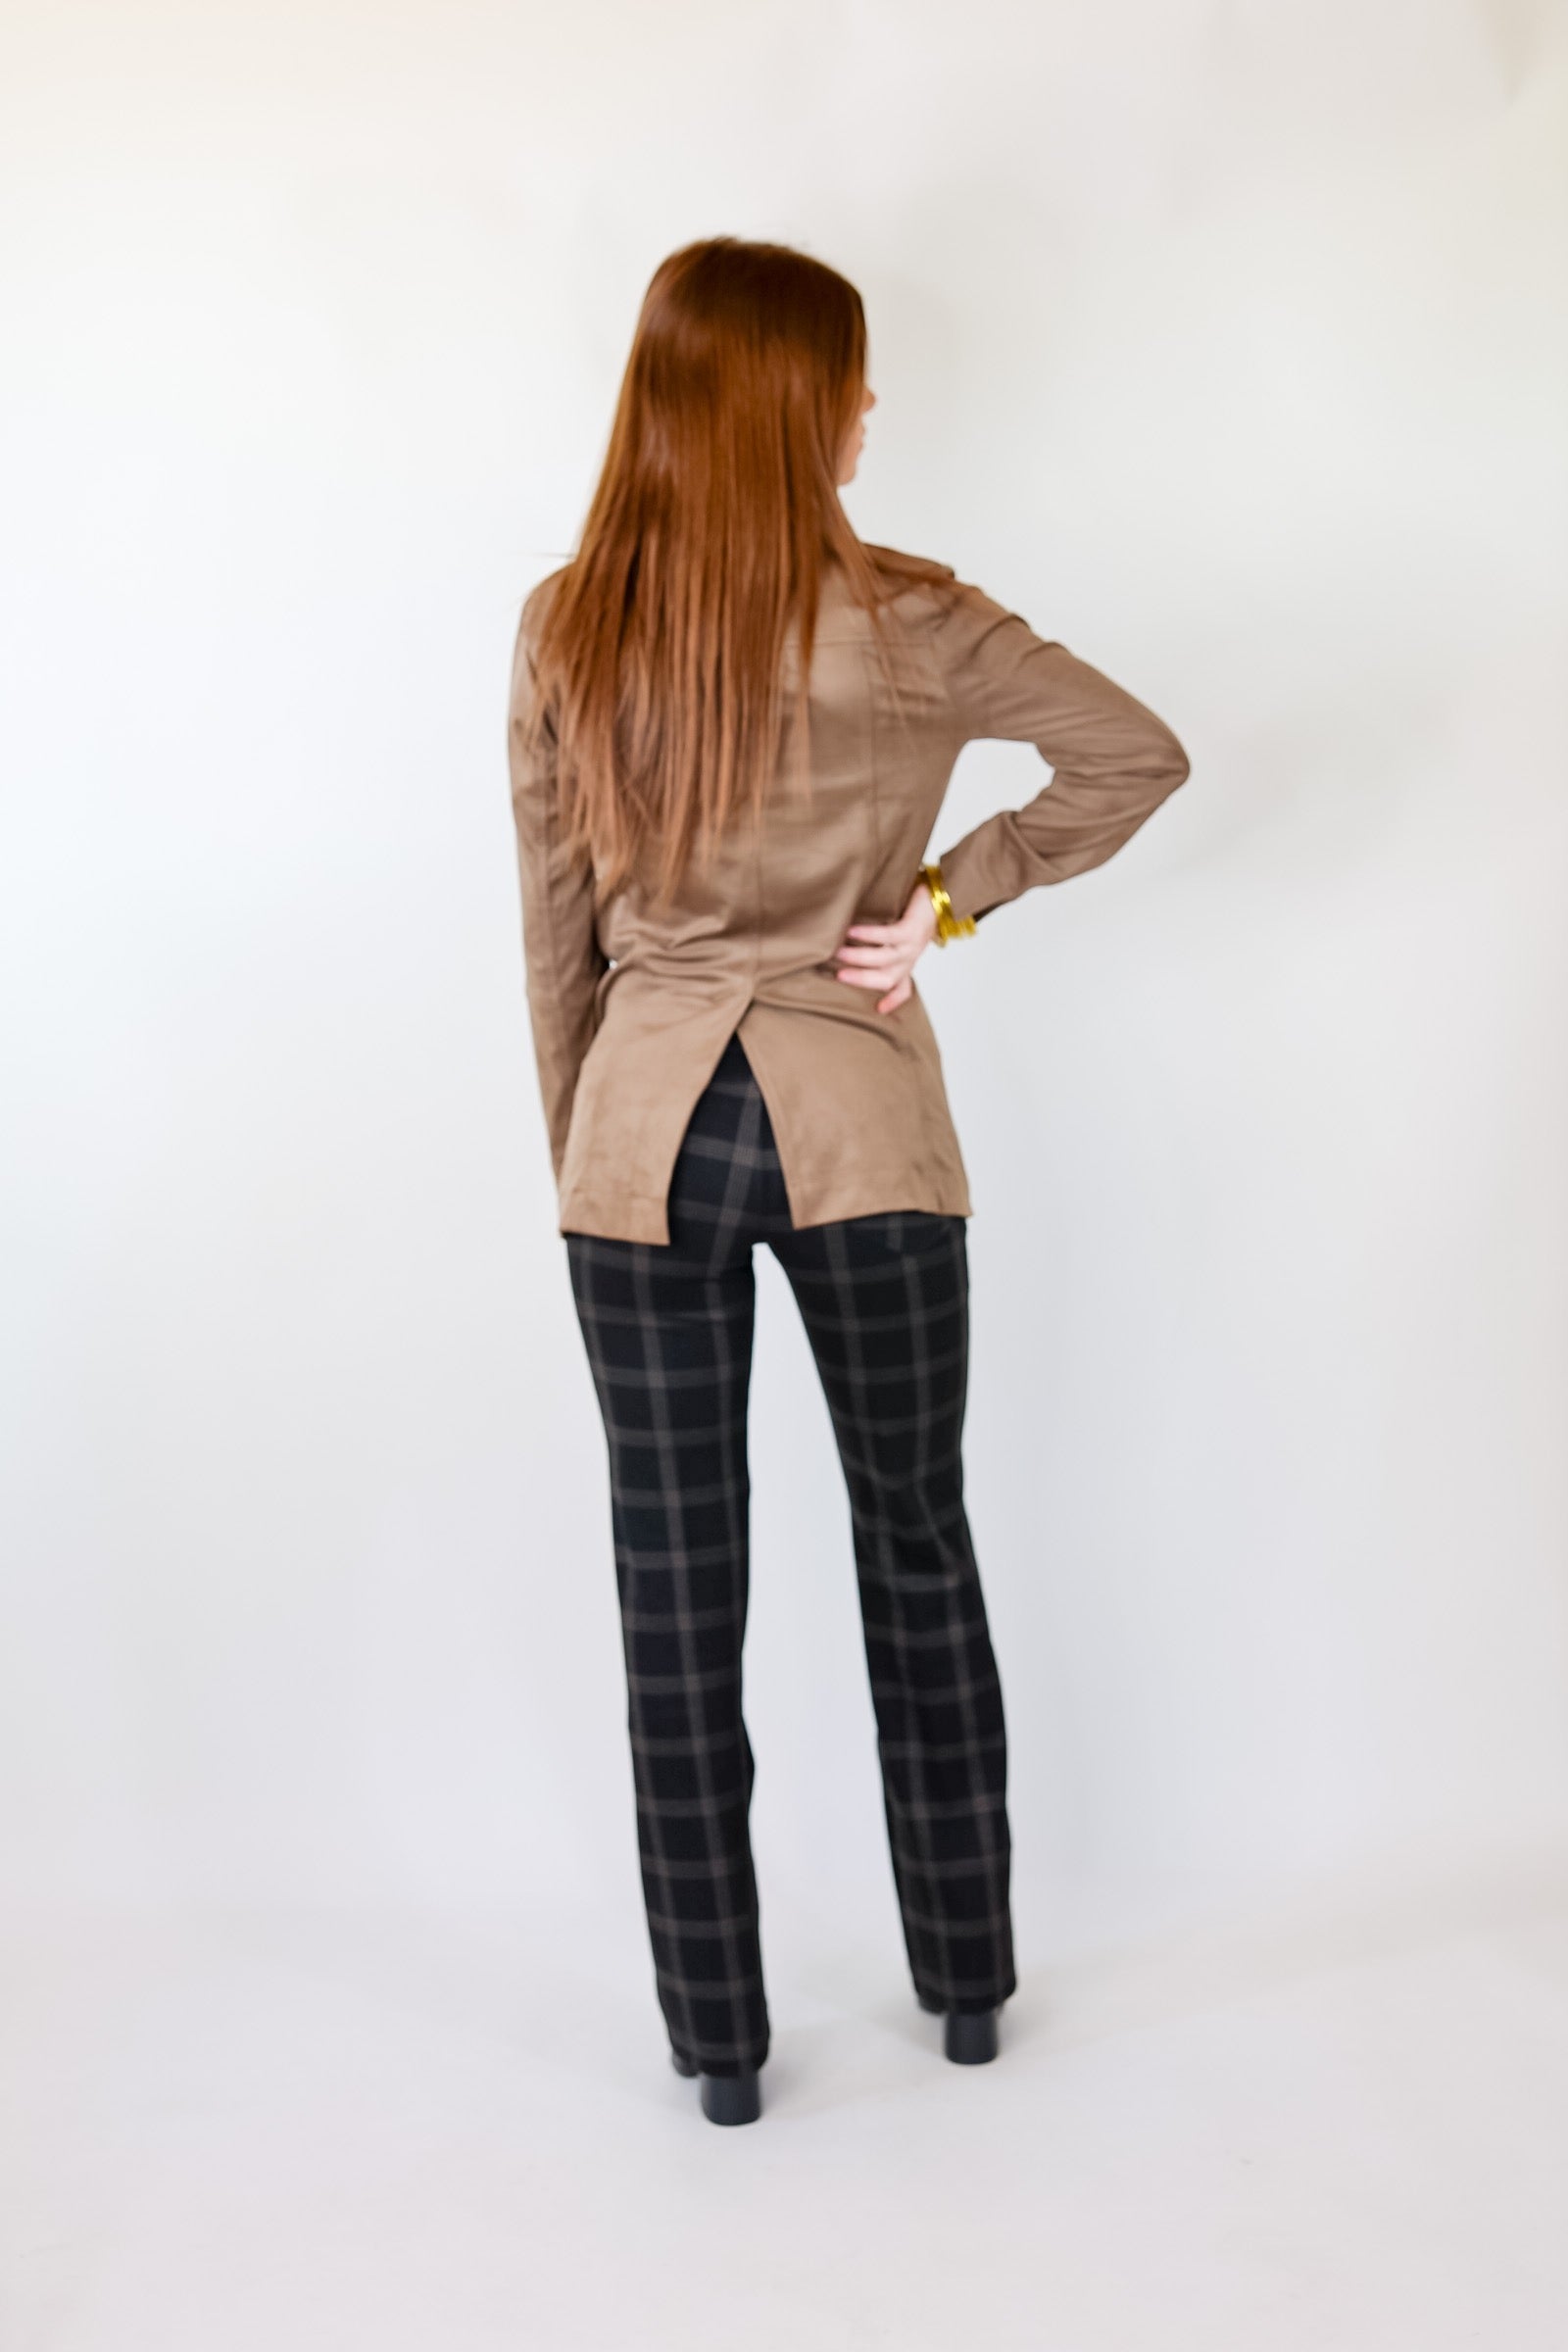 Lyssé | Abigail Suede Button Up Jacket in Chestnut Brown - Giddy Up Glamour Boutique